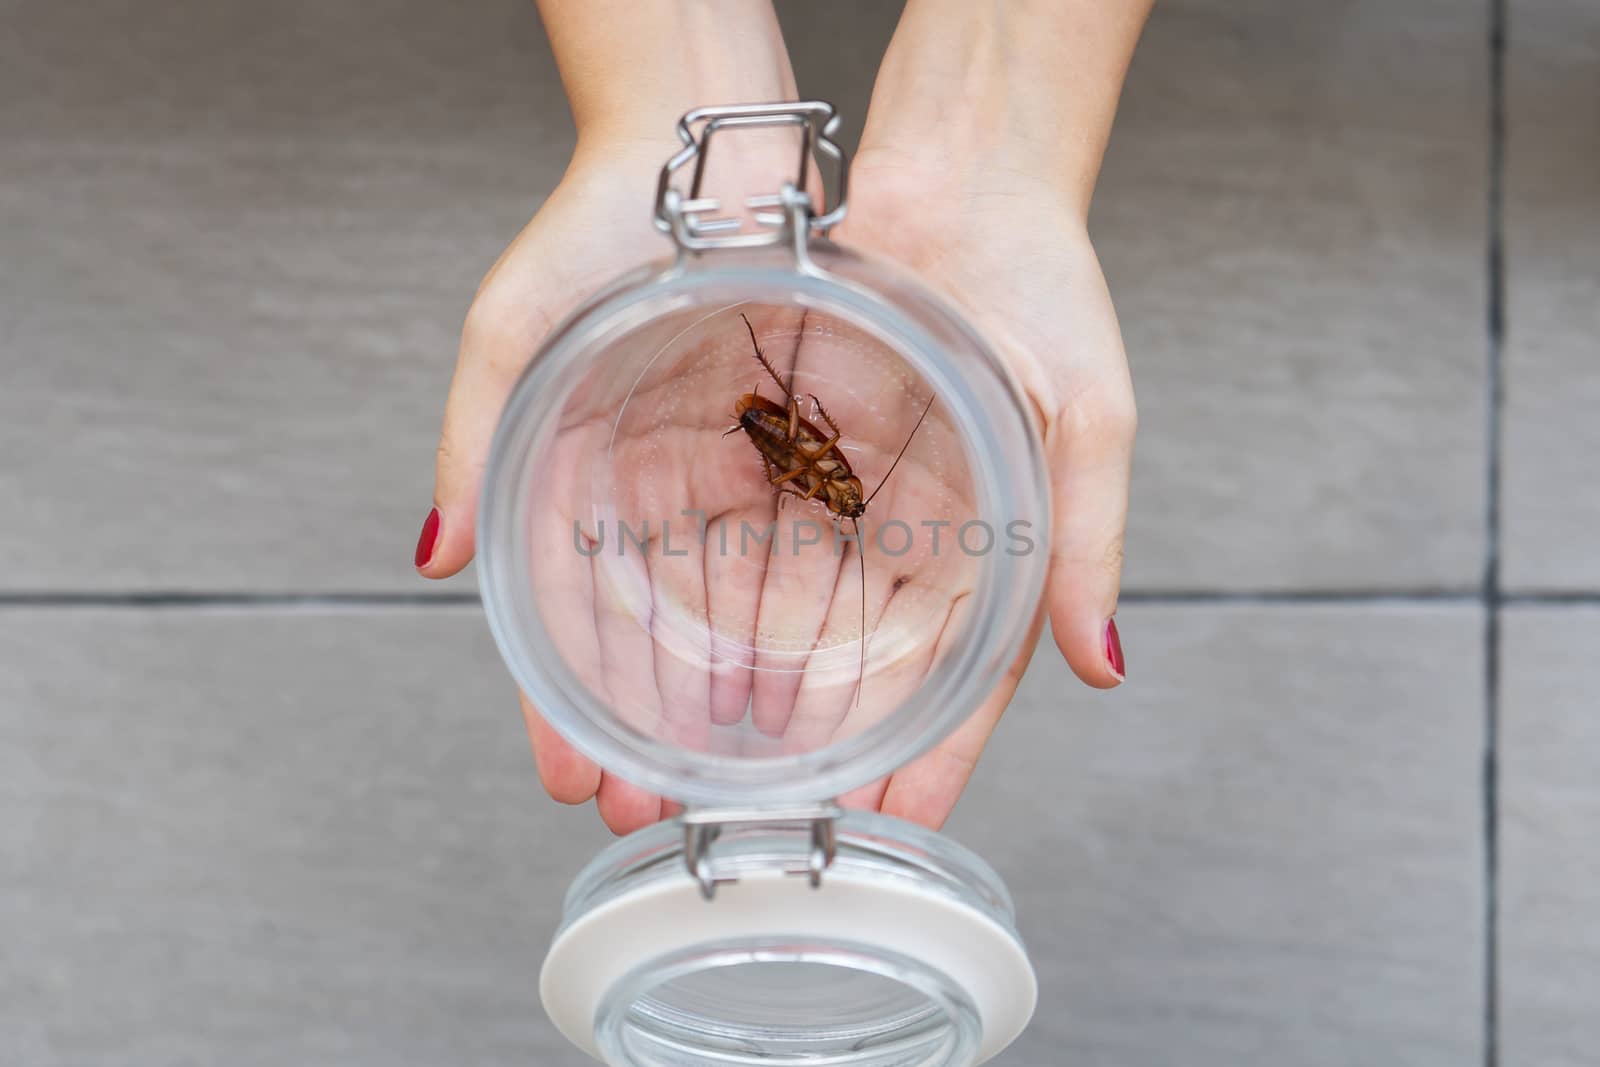 The girl holds on her palm a glass jar with a cockroach inside.